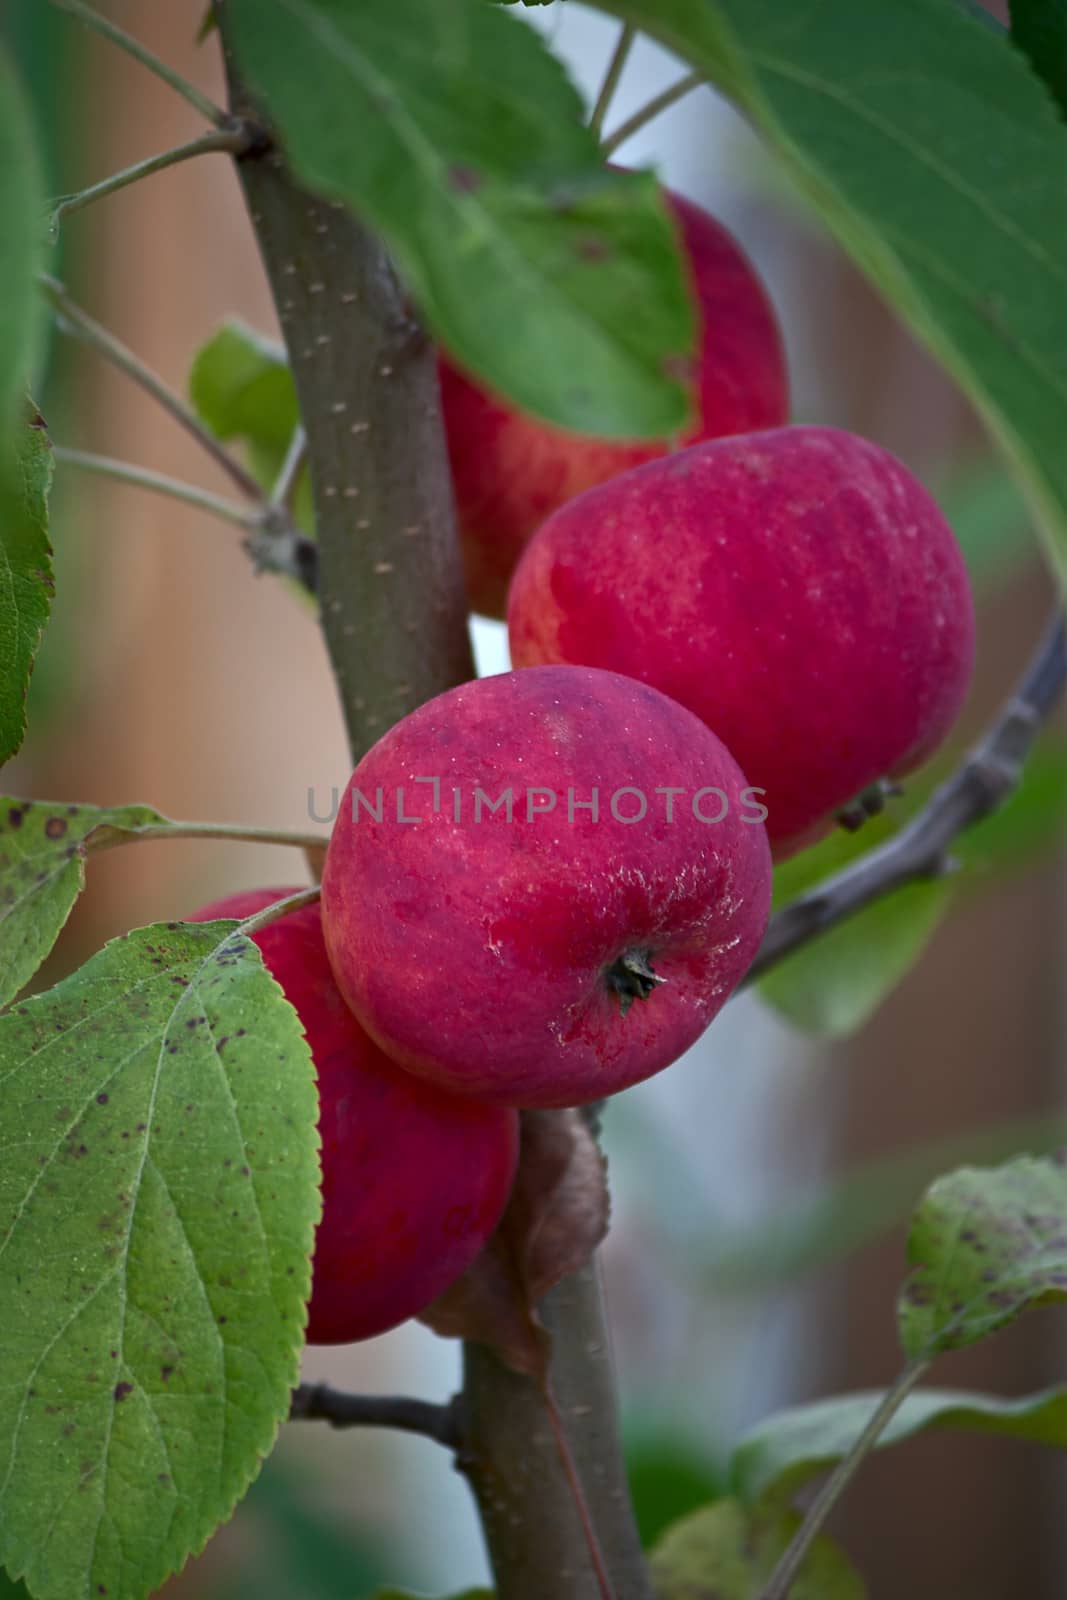 Apples on branch of apple tree in garden close up.